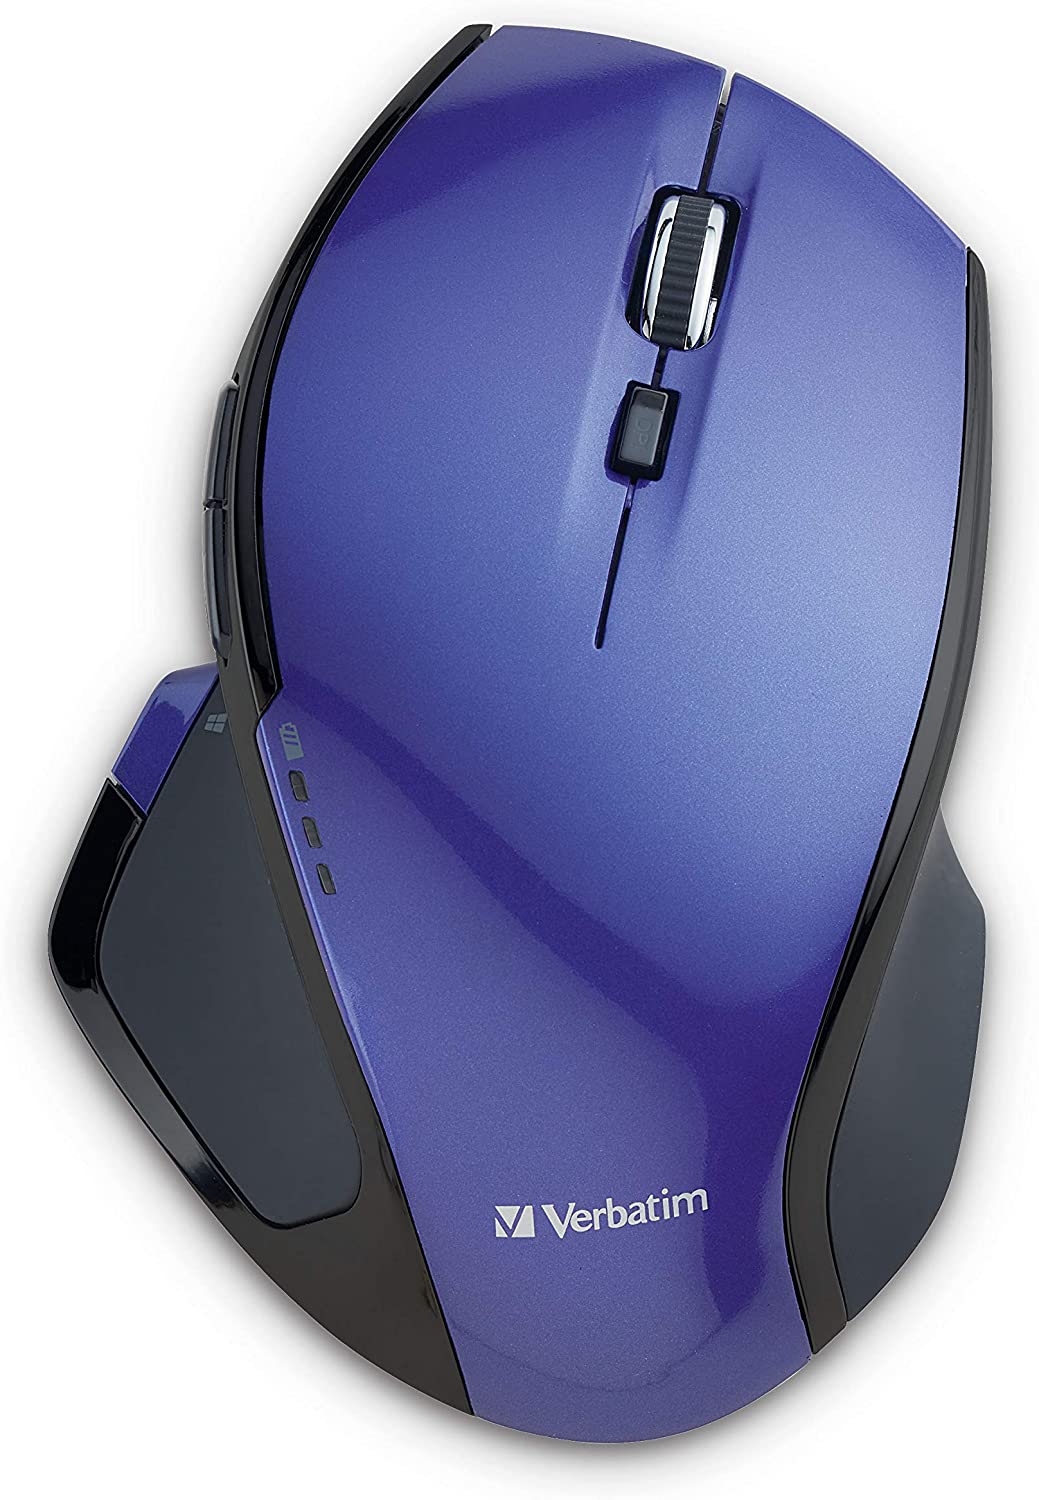 Verbatim 2.4G Wireless 8-Button LED Ergonomic Deluxe Mouse - Computer Mouse with Nano Receiver for Mac and PC - Purple